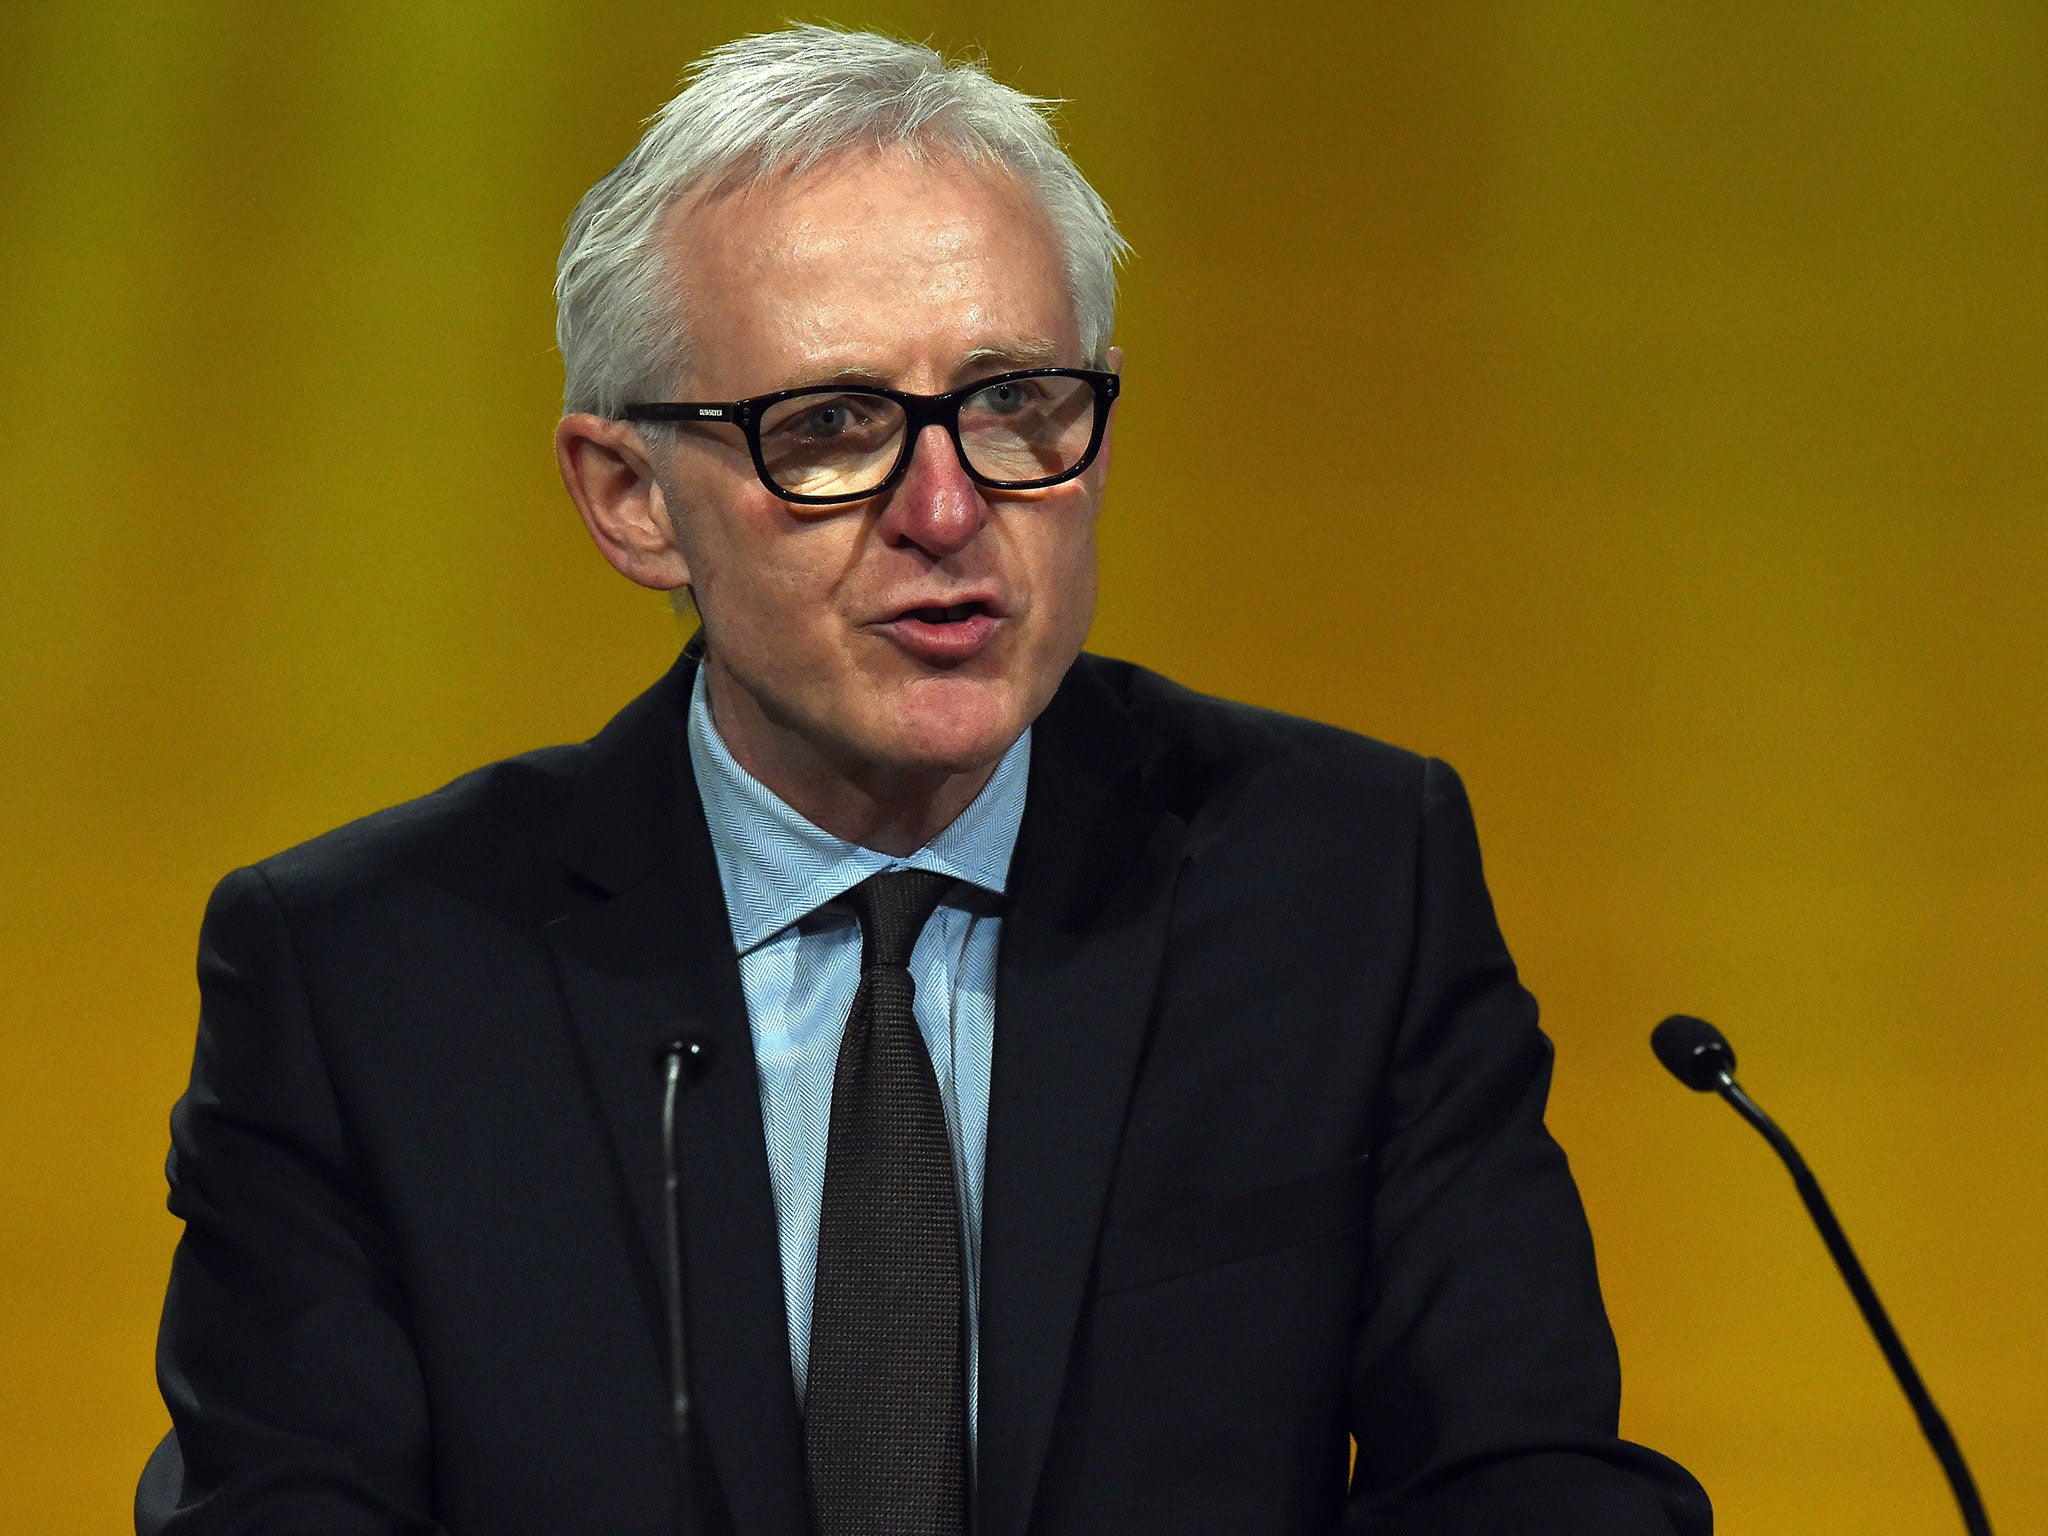 The former health minister Norman Lamb is to stand for the Liberal Democrat leadership